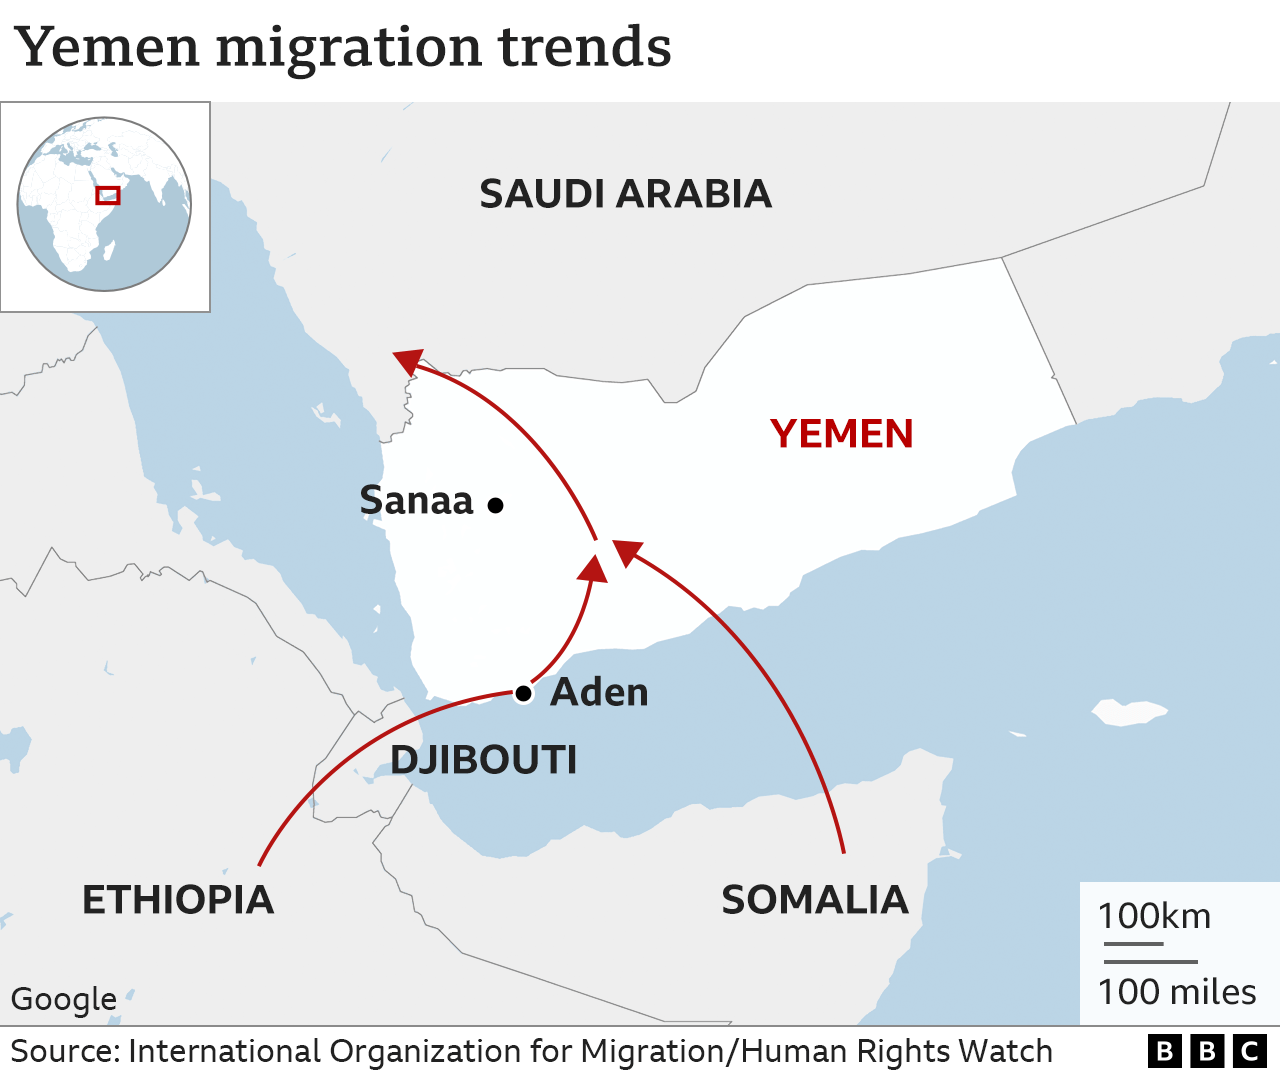 A map that shows the routes Ethiopian and Somali migrants take to Saudi Arabia